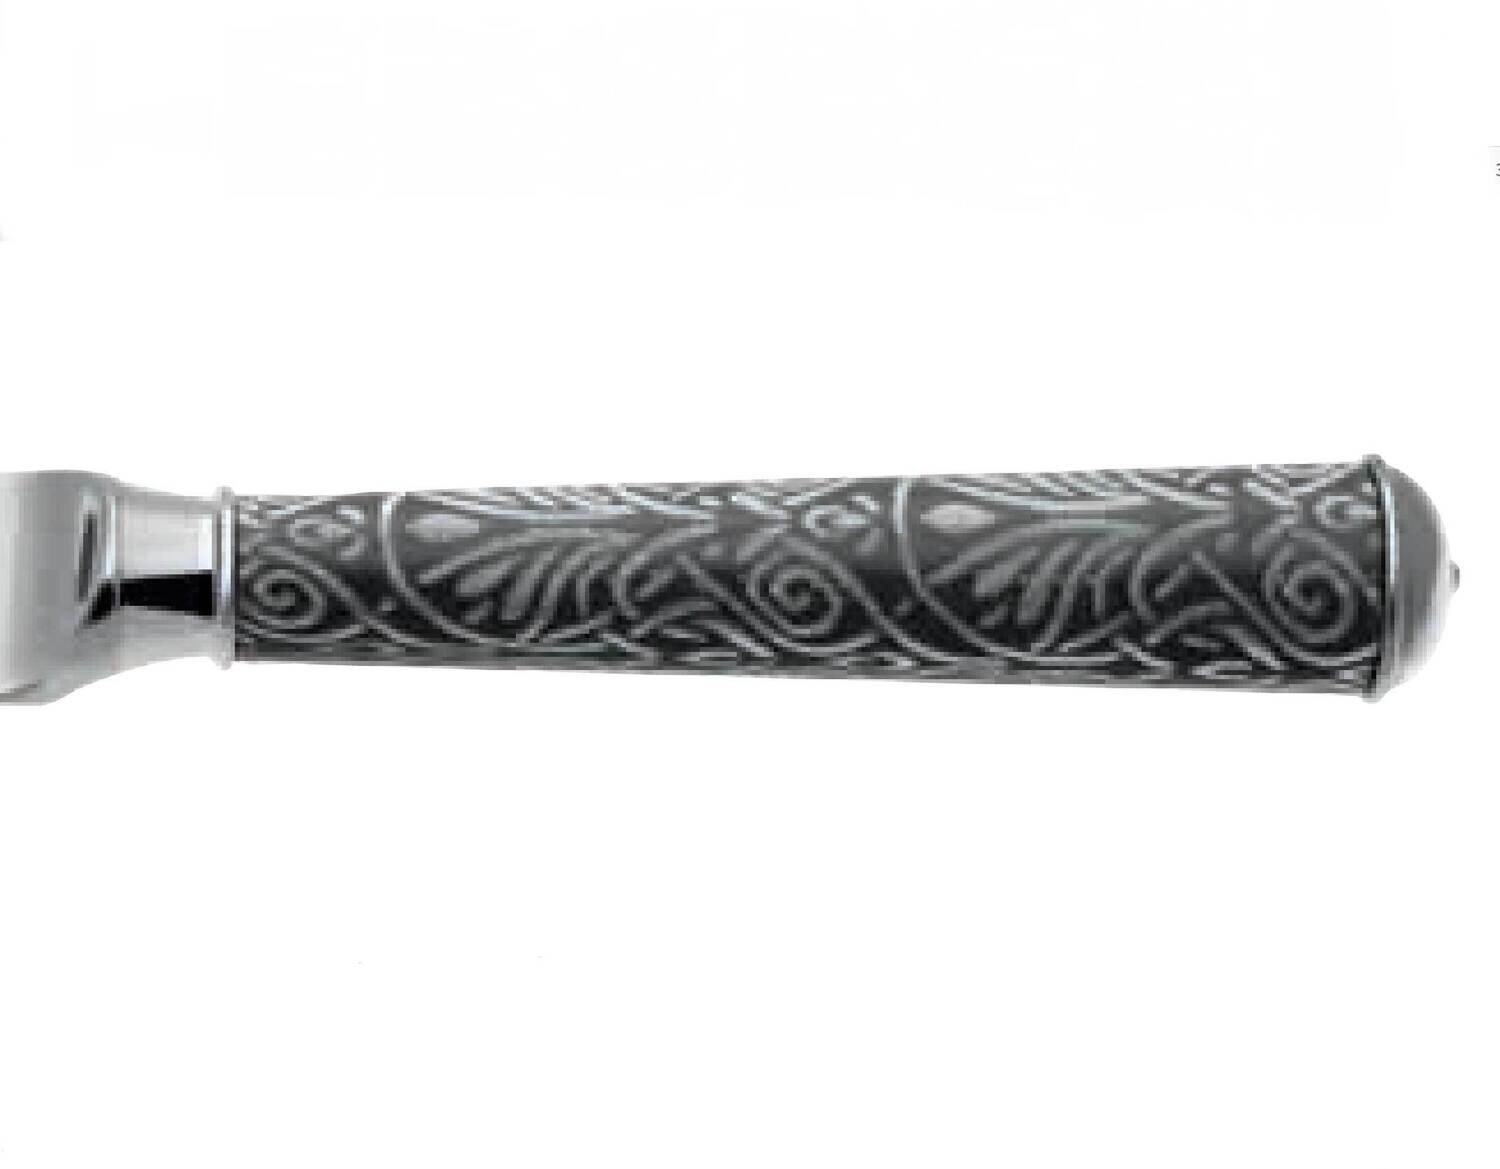 Ercuis Guirlande Tree Carving Knife 11.625 Inch Silver Plated F60051P-46